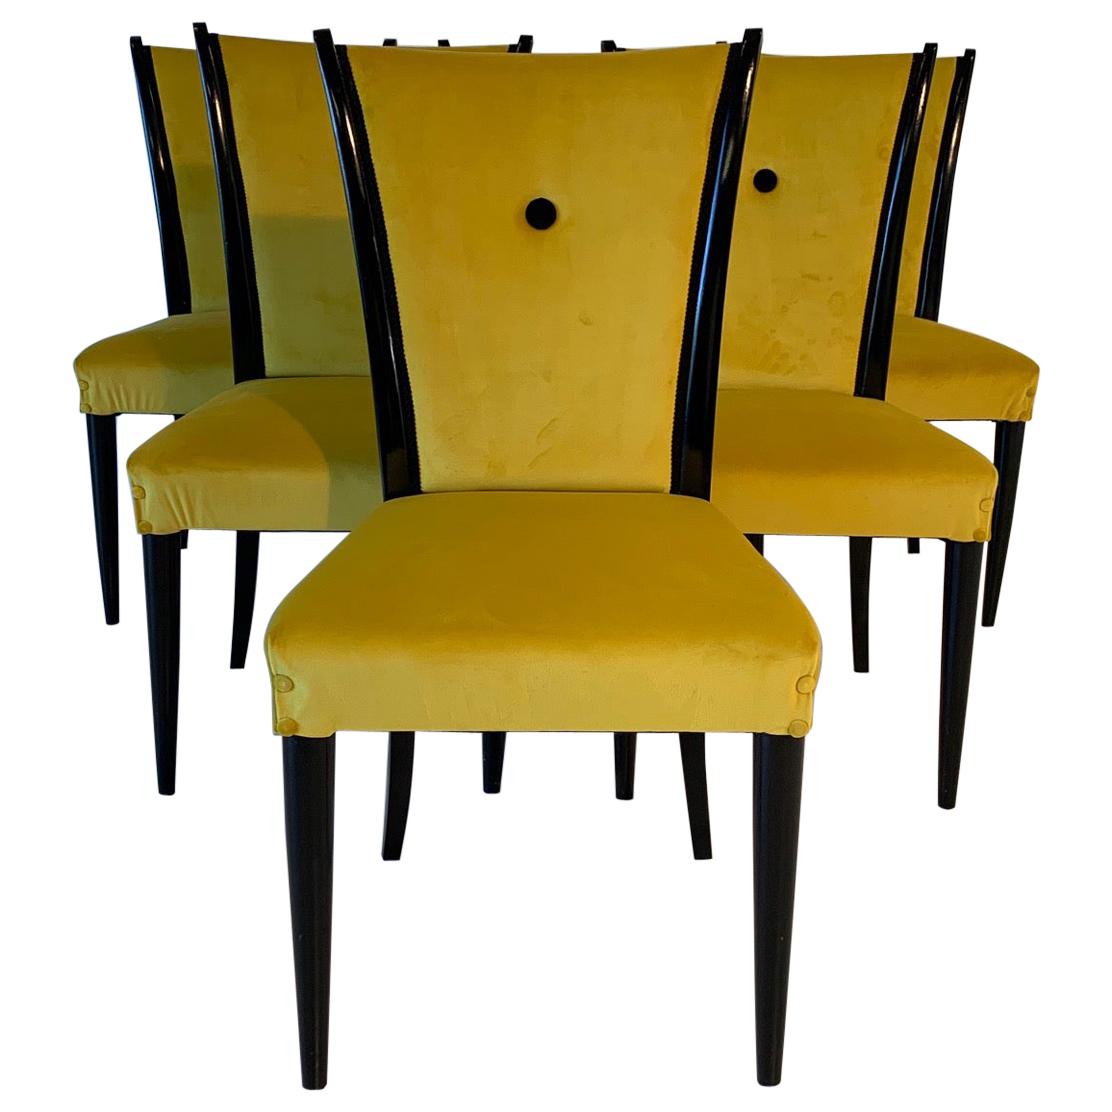 Italian Art Deco Black Lacquered Wood and Yellow Velvet Chairs, 1930s